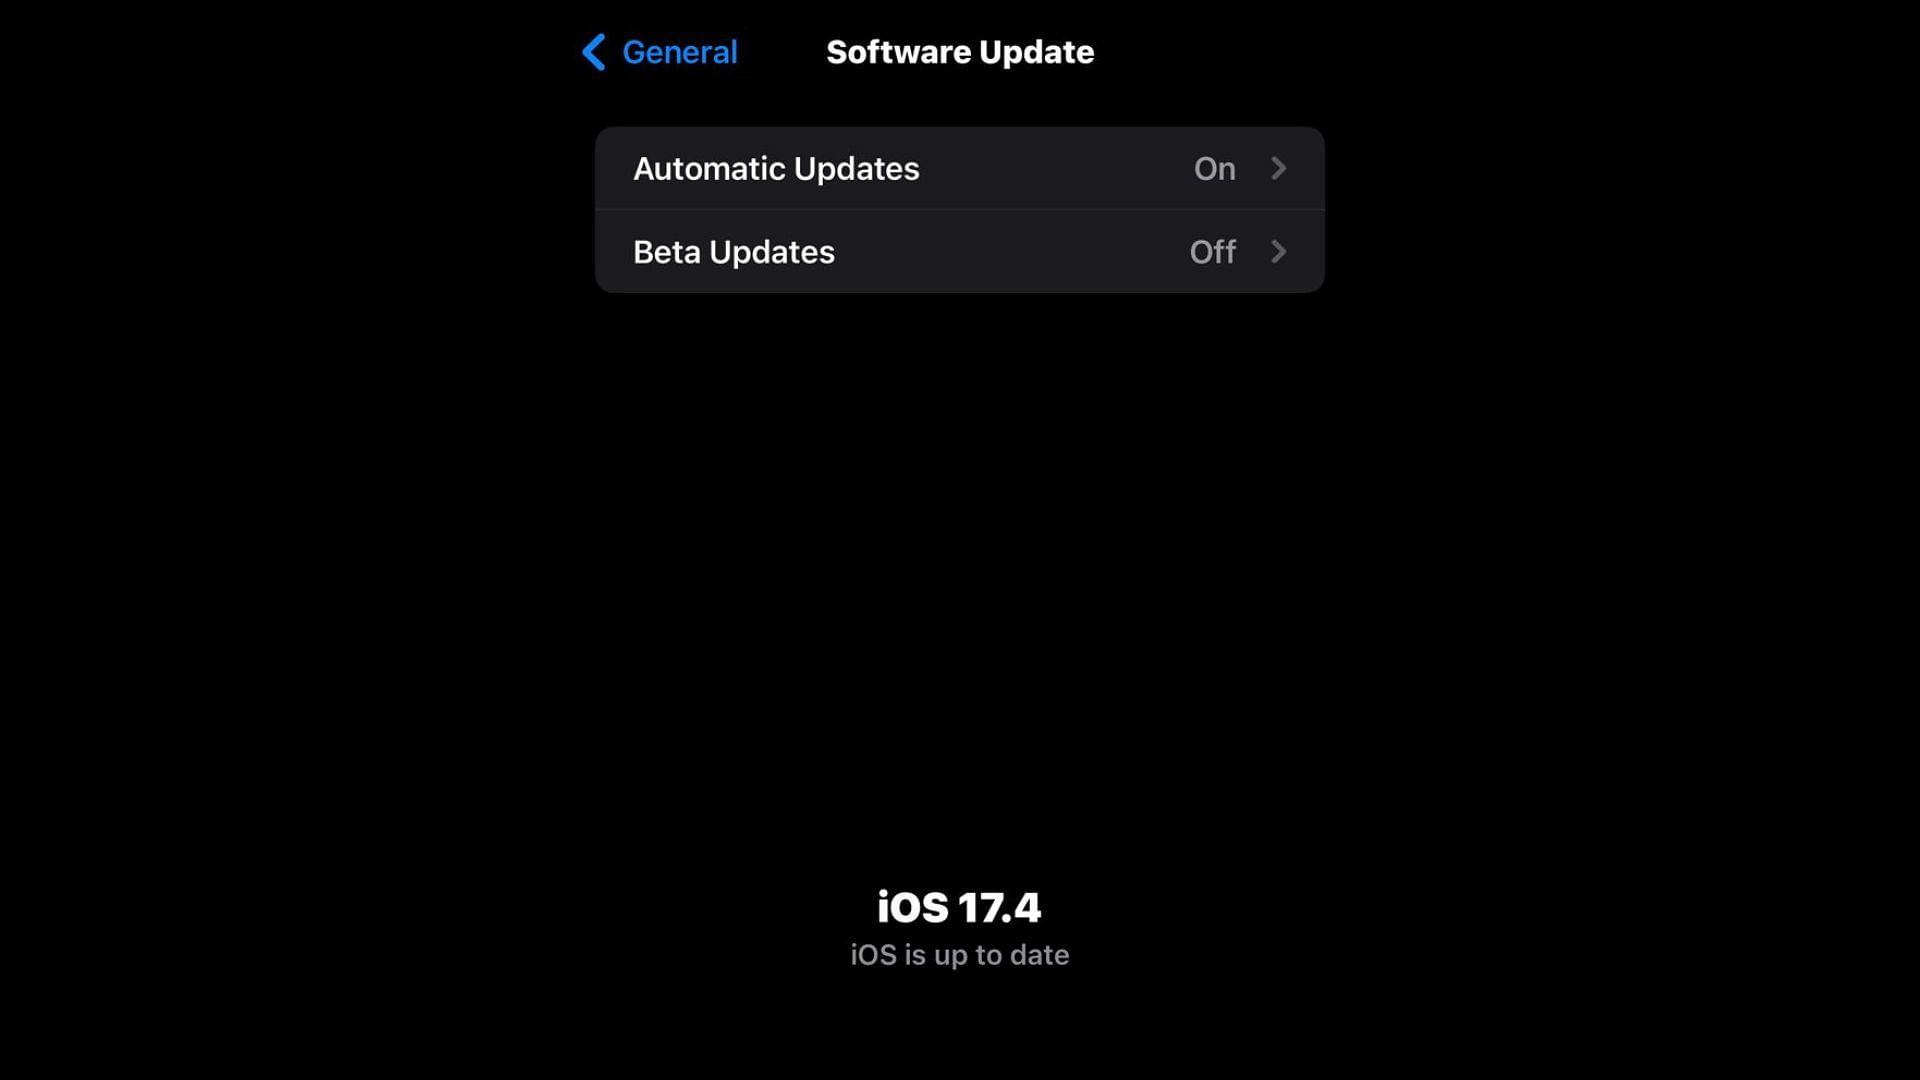 iPhone is updated to iOS 17.4 (Image via Apple)